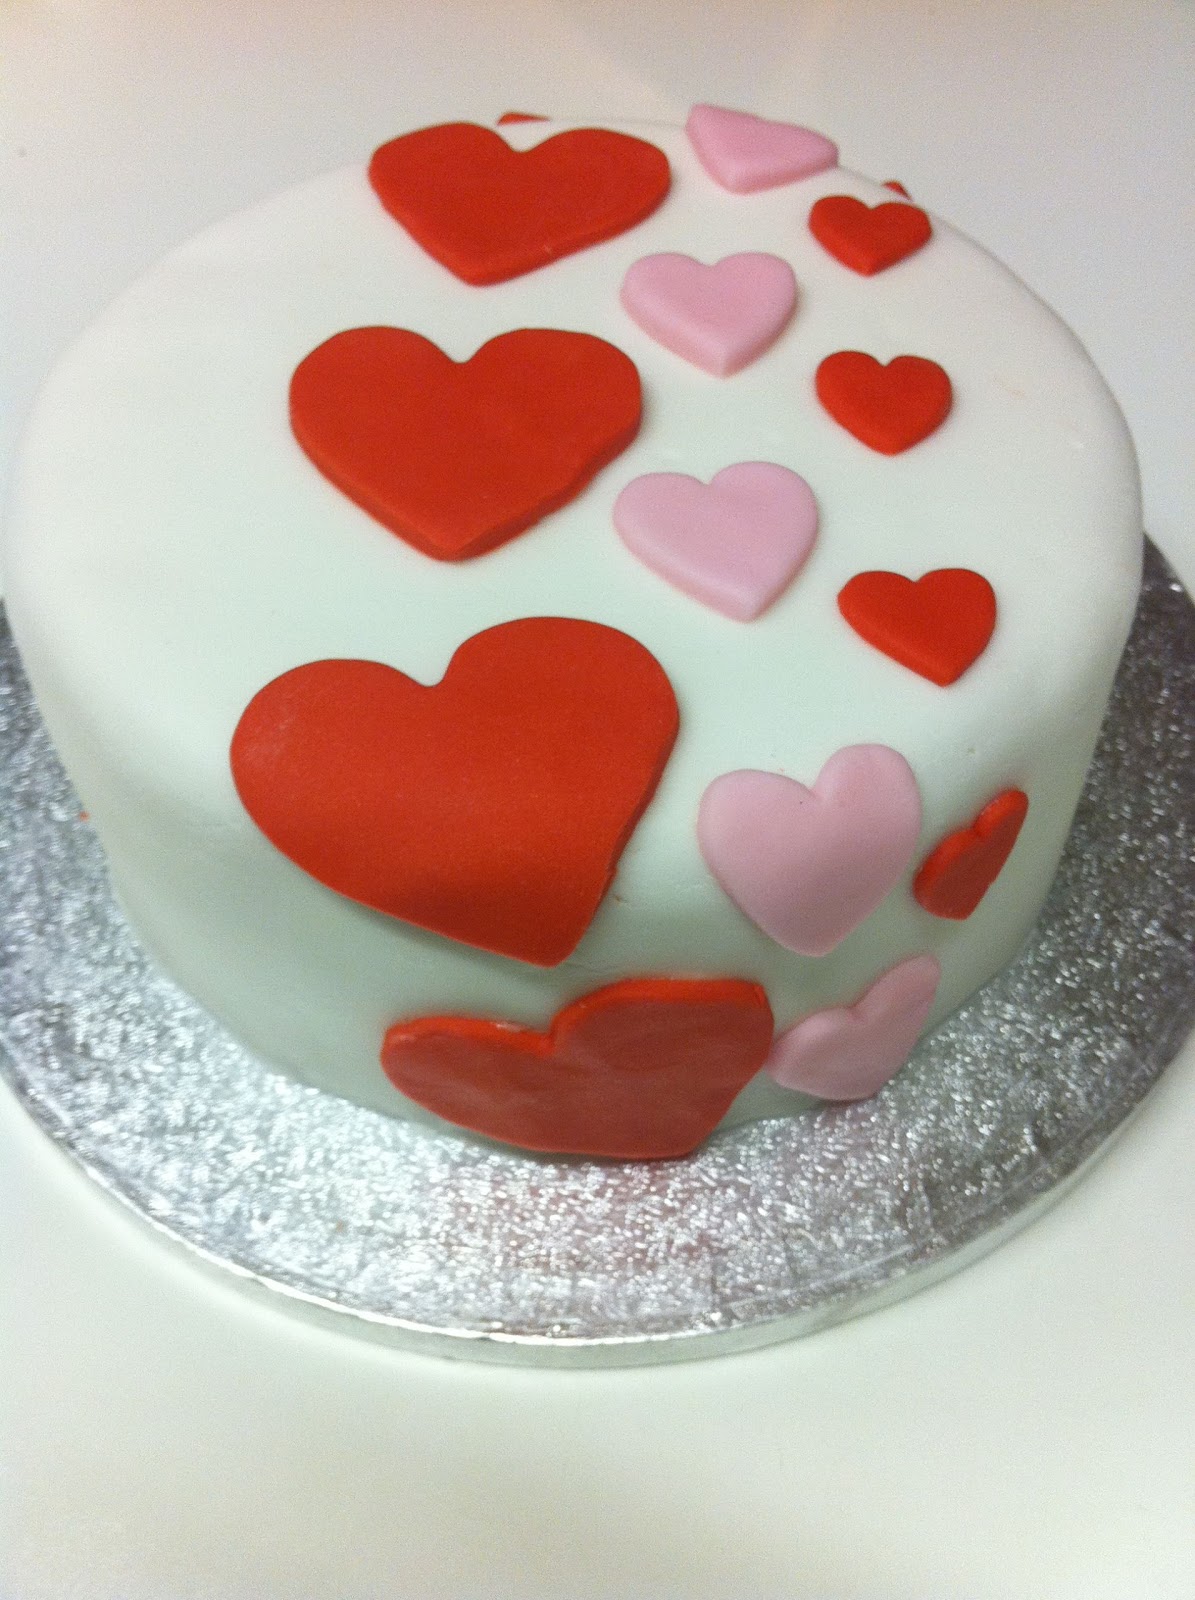 Totally Baked Cakes: HAPPY VALENTINES DAY!